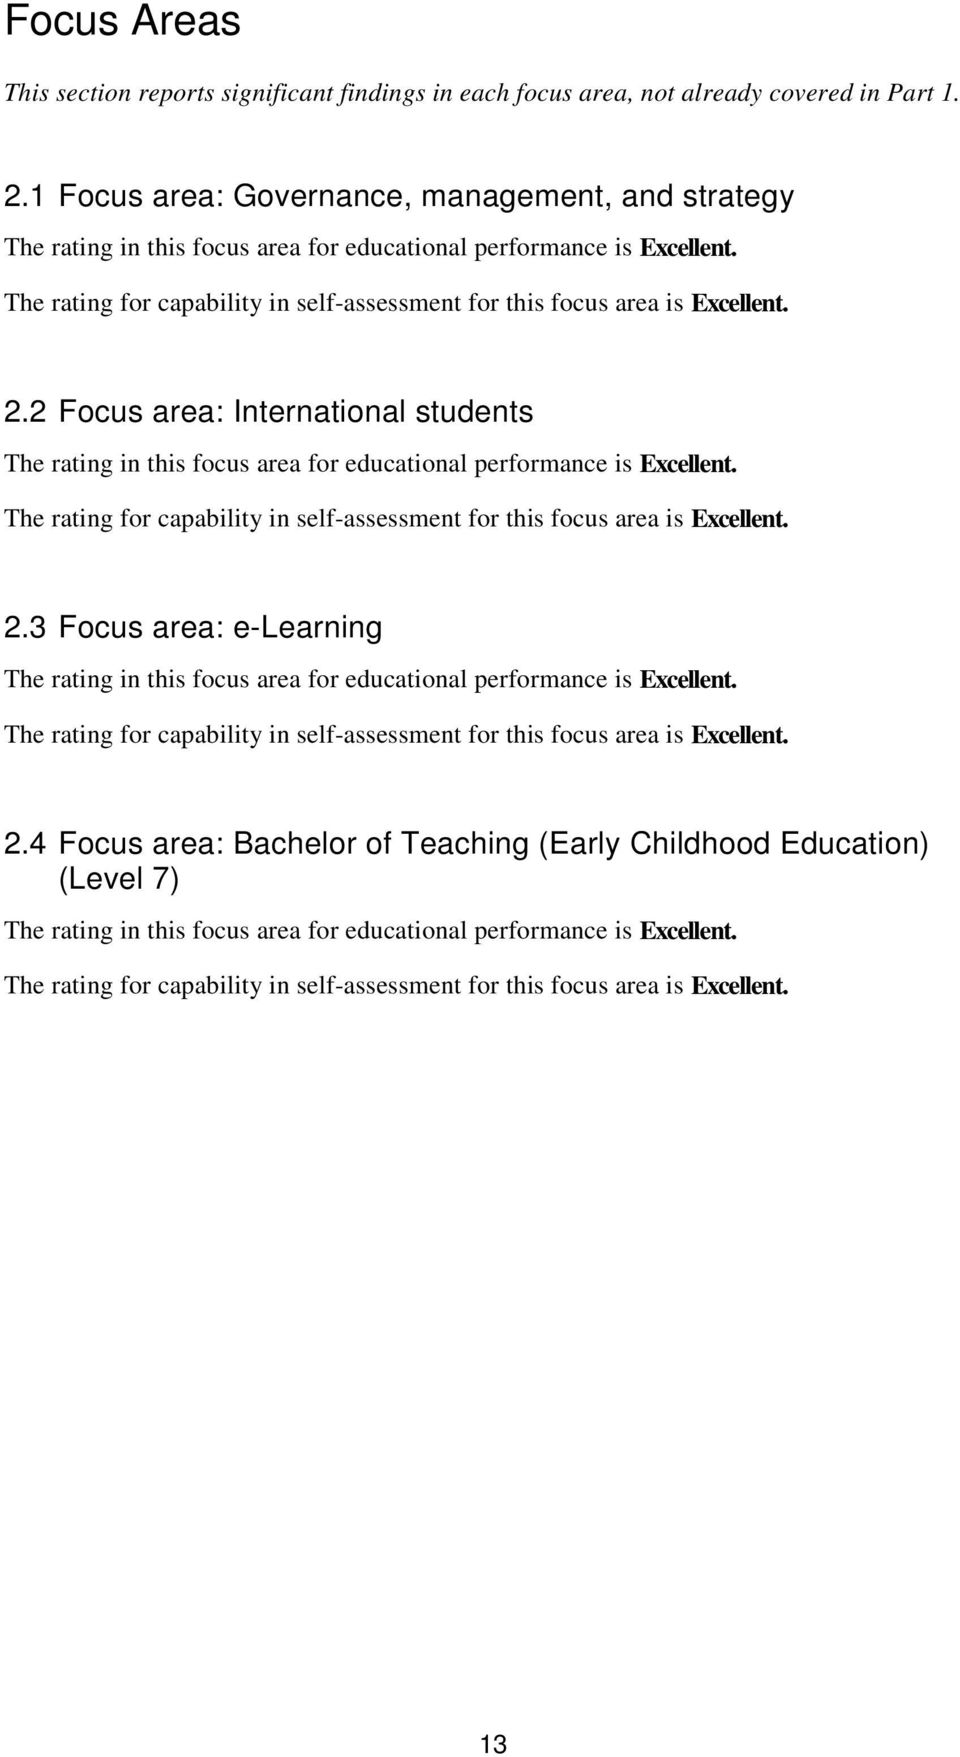 The rating for capability in self-assessment for this focus area is Excellent. 2.2 Focus area: International students The rating in this focus area for educational performance is Excellent.